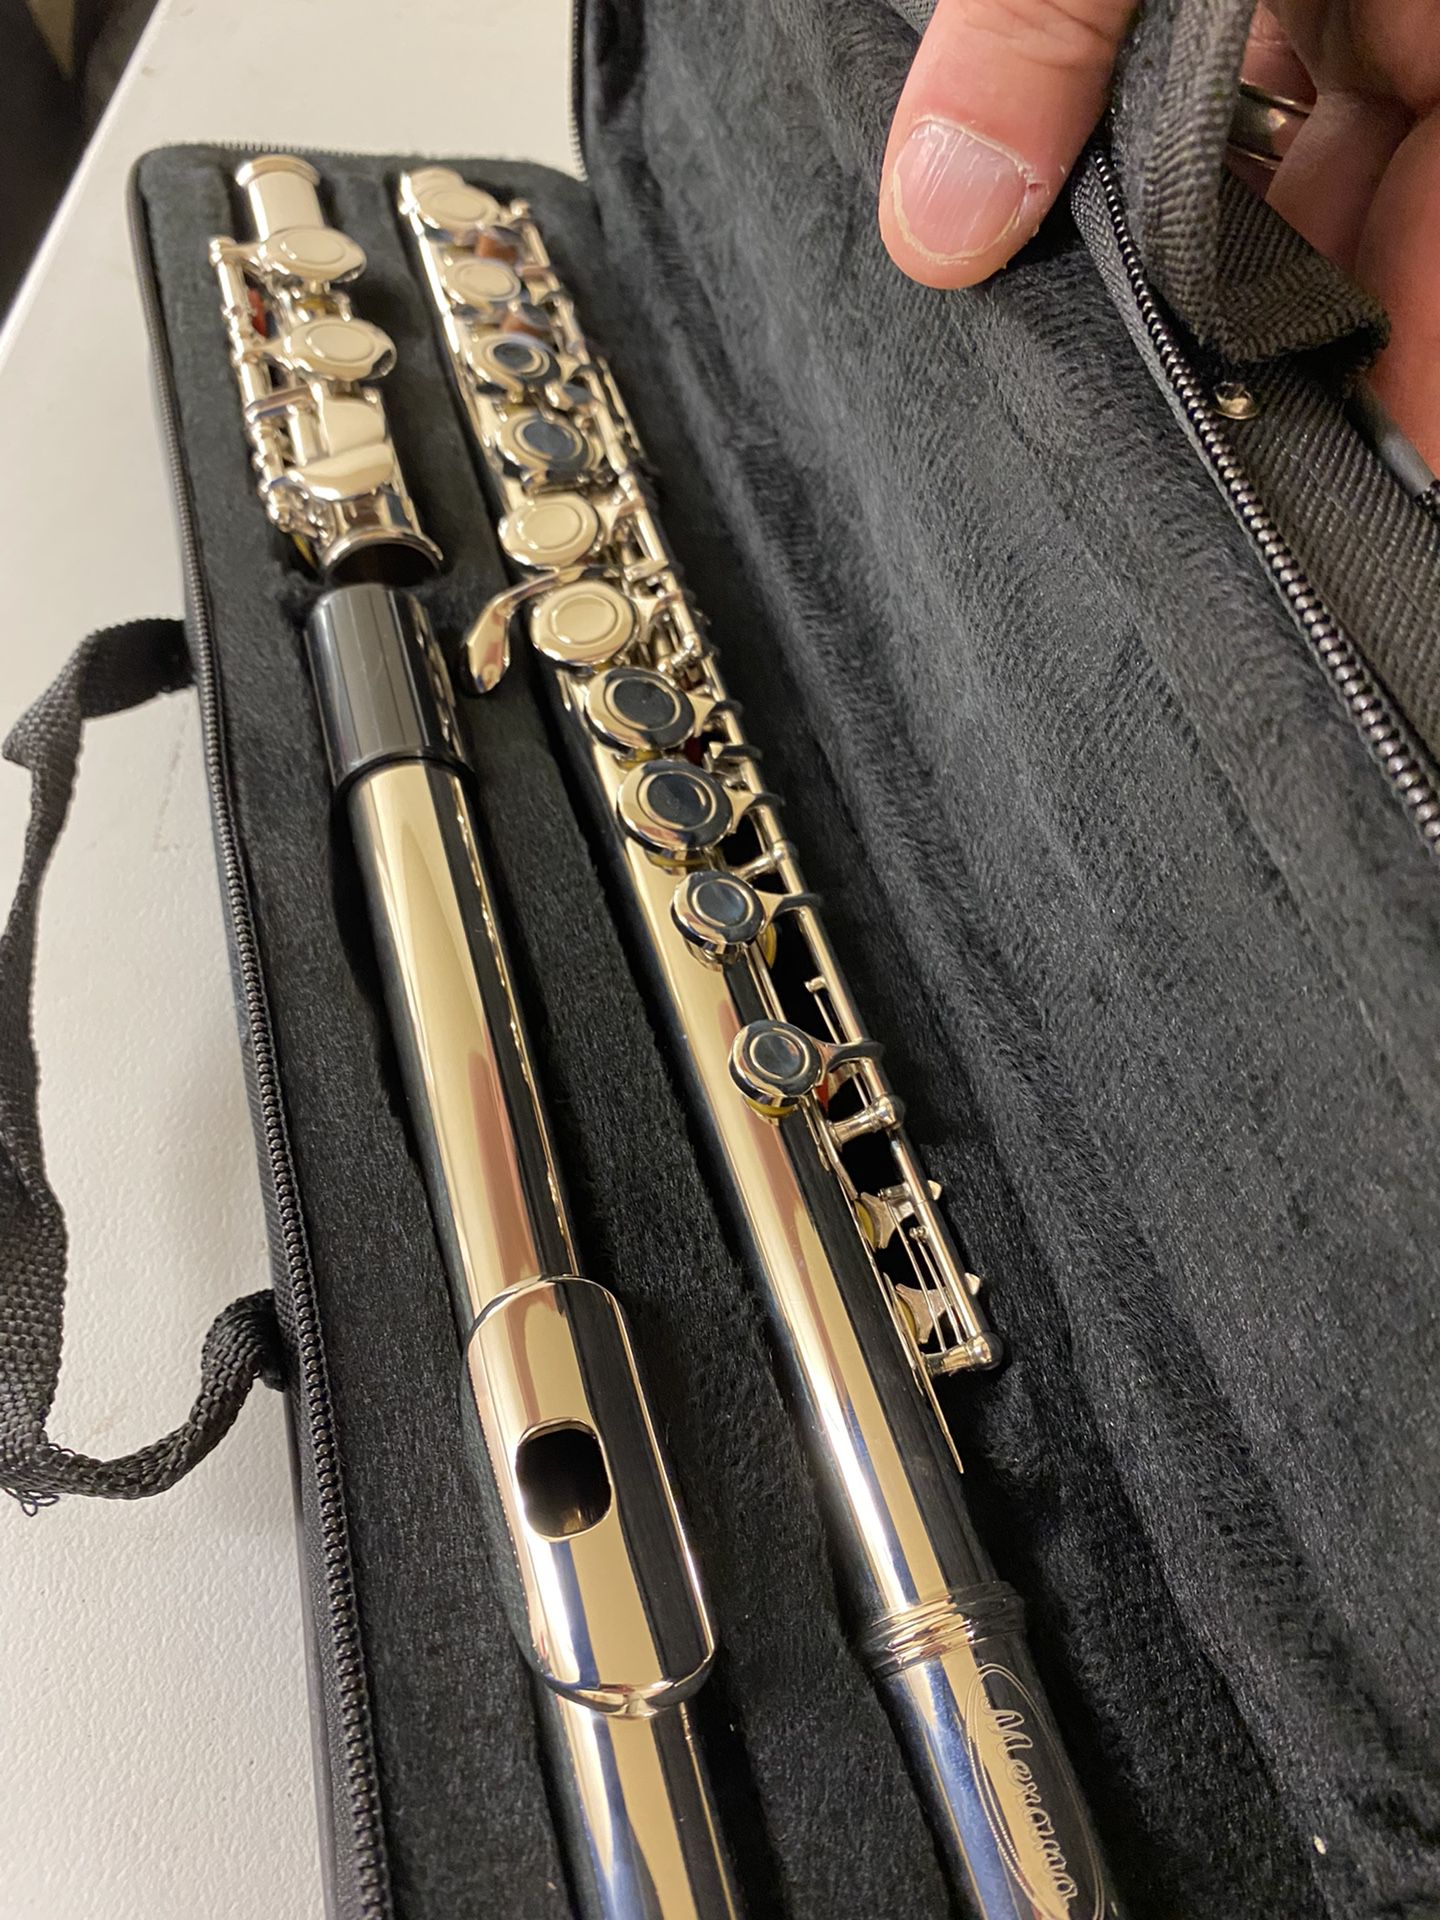 Nice Silver Flute Excellent Condition $120 Firm